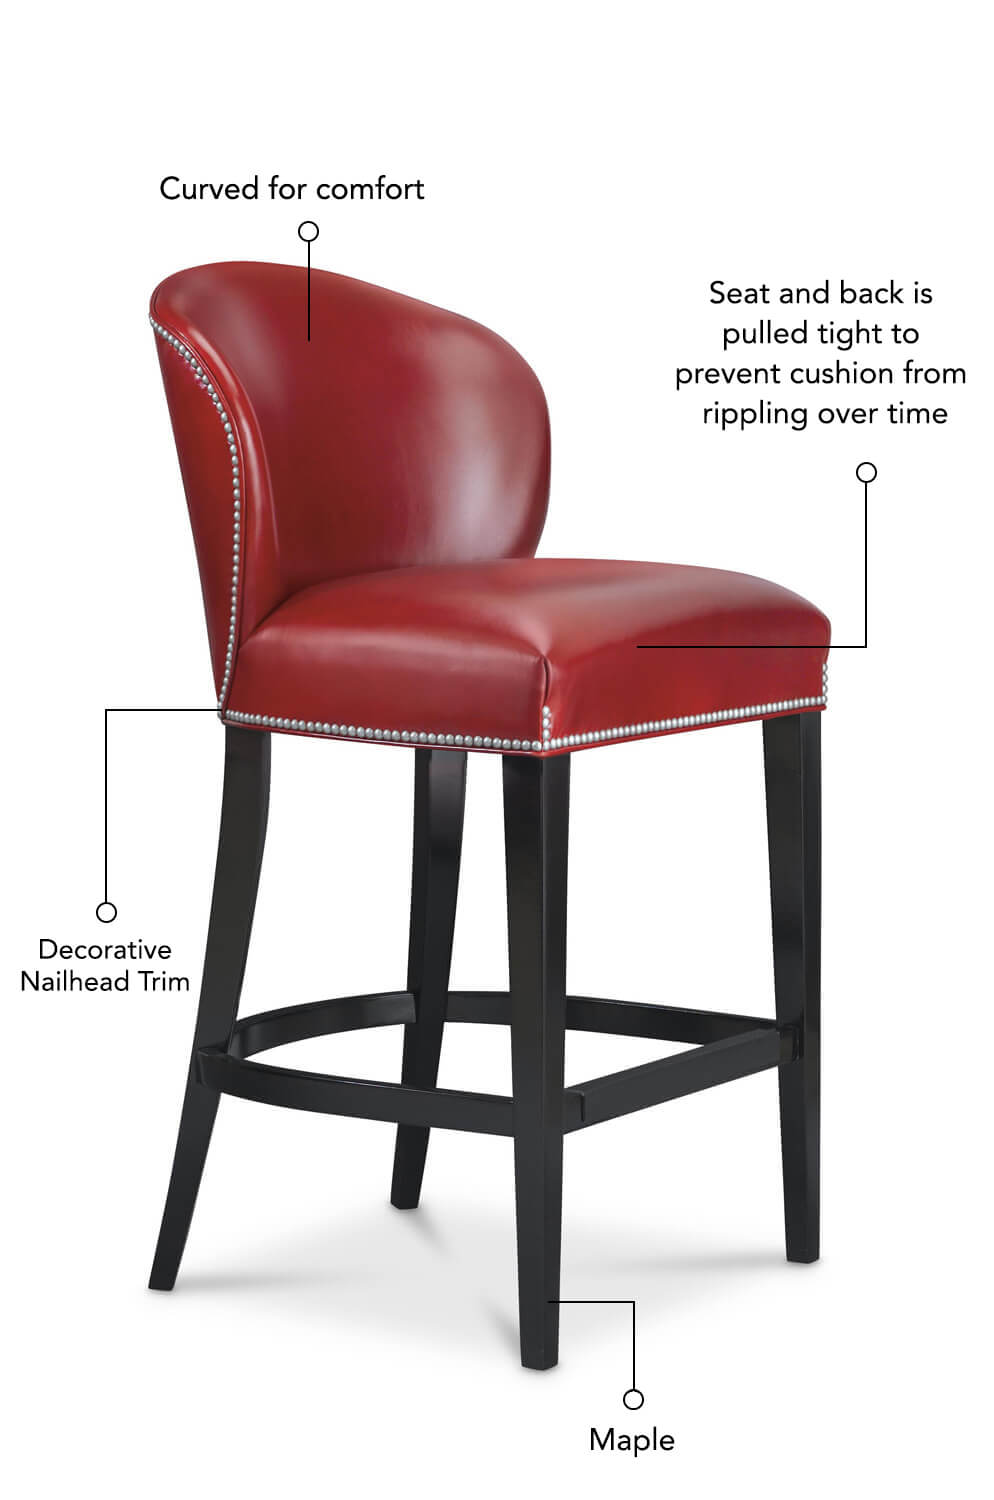 Seat and back is pulled tight to prevent cushion from rippling over time, curved back for comfort, decorative nailhead trim, and the base is made of maple wood.